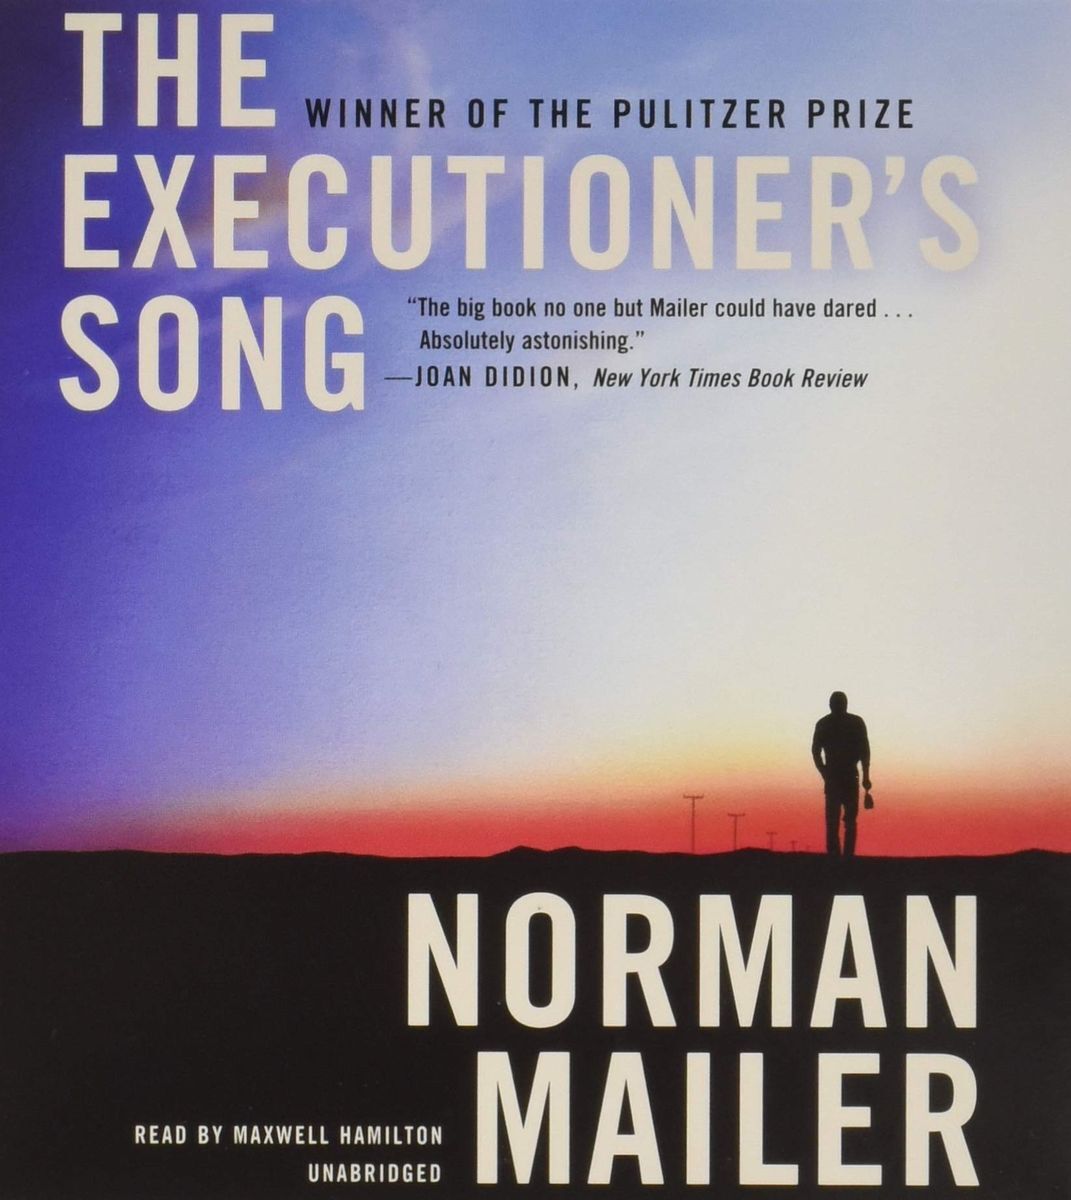 <p>The <a href="https://meadowparty.com/blog/2016/01/20/the-executioners-song/">true-story book</a> may be Norman Mailer’s greatest work, winning the Pulitzer Prize for Fiction in 1980 (even though it is not a work of fiction). Mailer used taped interviews with relatives, friends, lawyers, and law enforcement officials to reconstruct the crime and fate of Gary Gilmore, a convicted murderer who sought his own execution in Utah. </p> <p>Gilmore had robbed two men in 1976 and killed them in cold blood. He fought for the right to die in a system designed to put off execution as long as possible.</p>